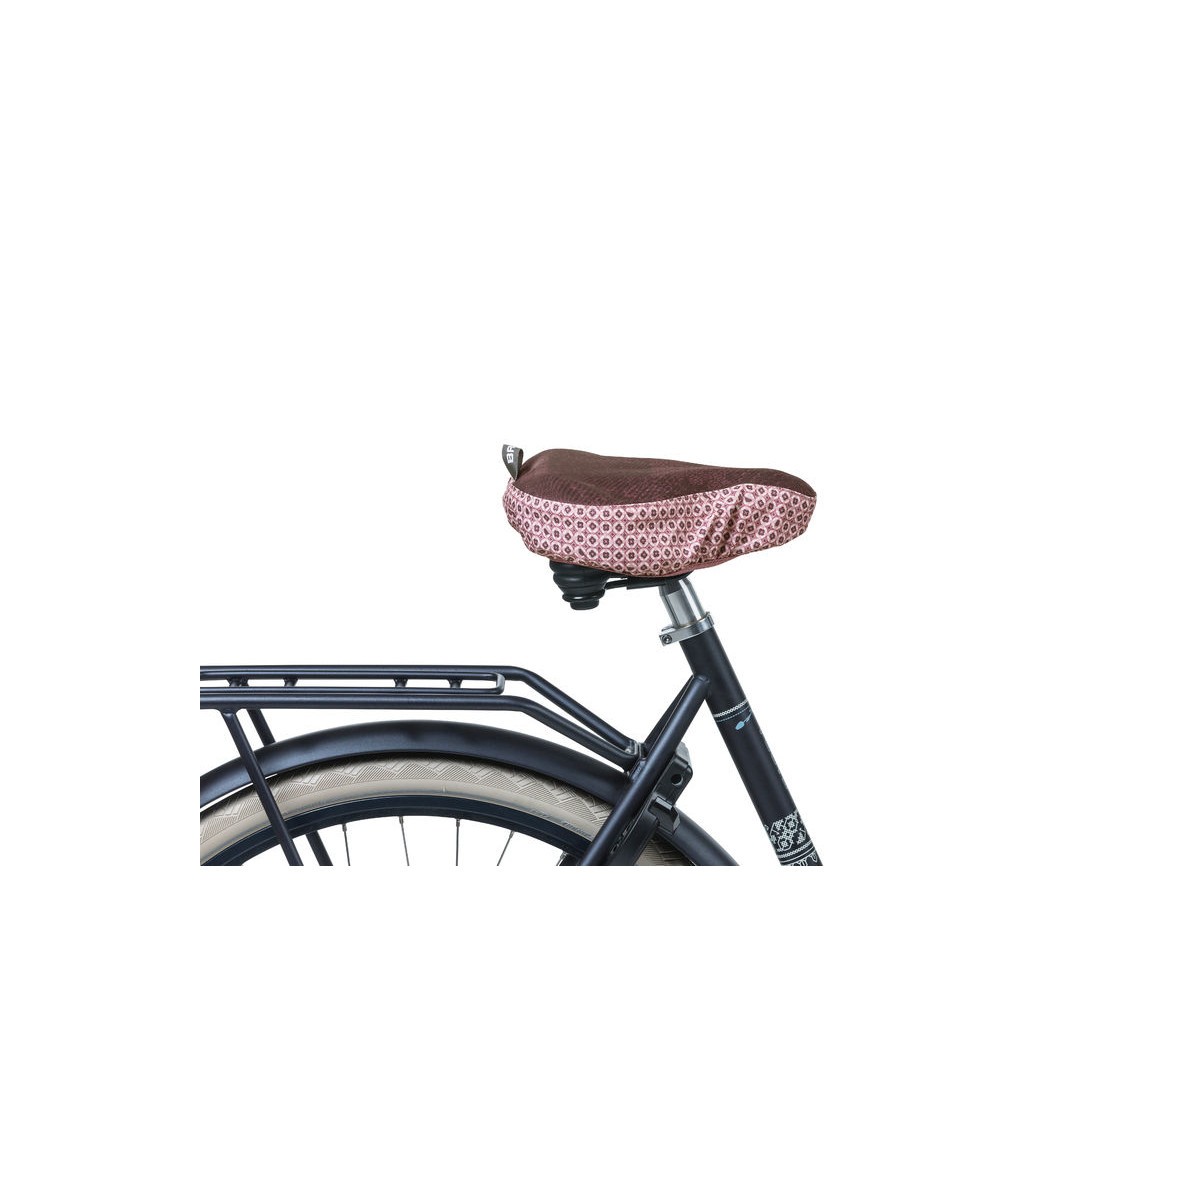 Couvre selle Basil BOHEME-SADDLE COVER red